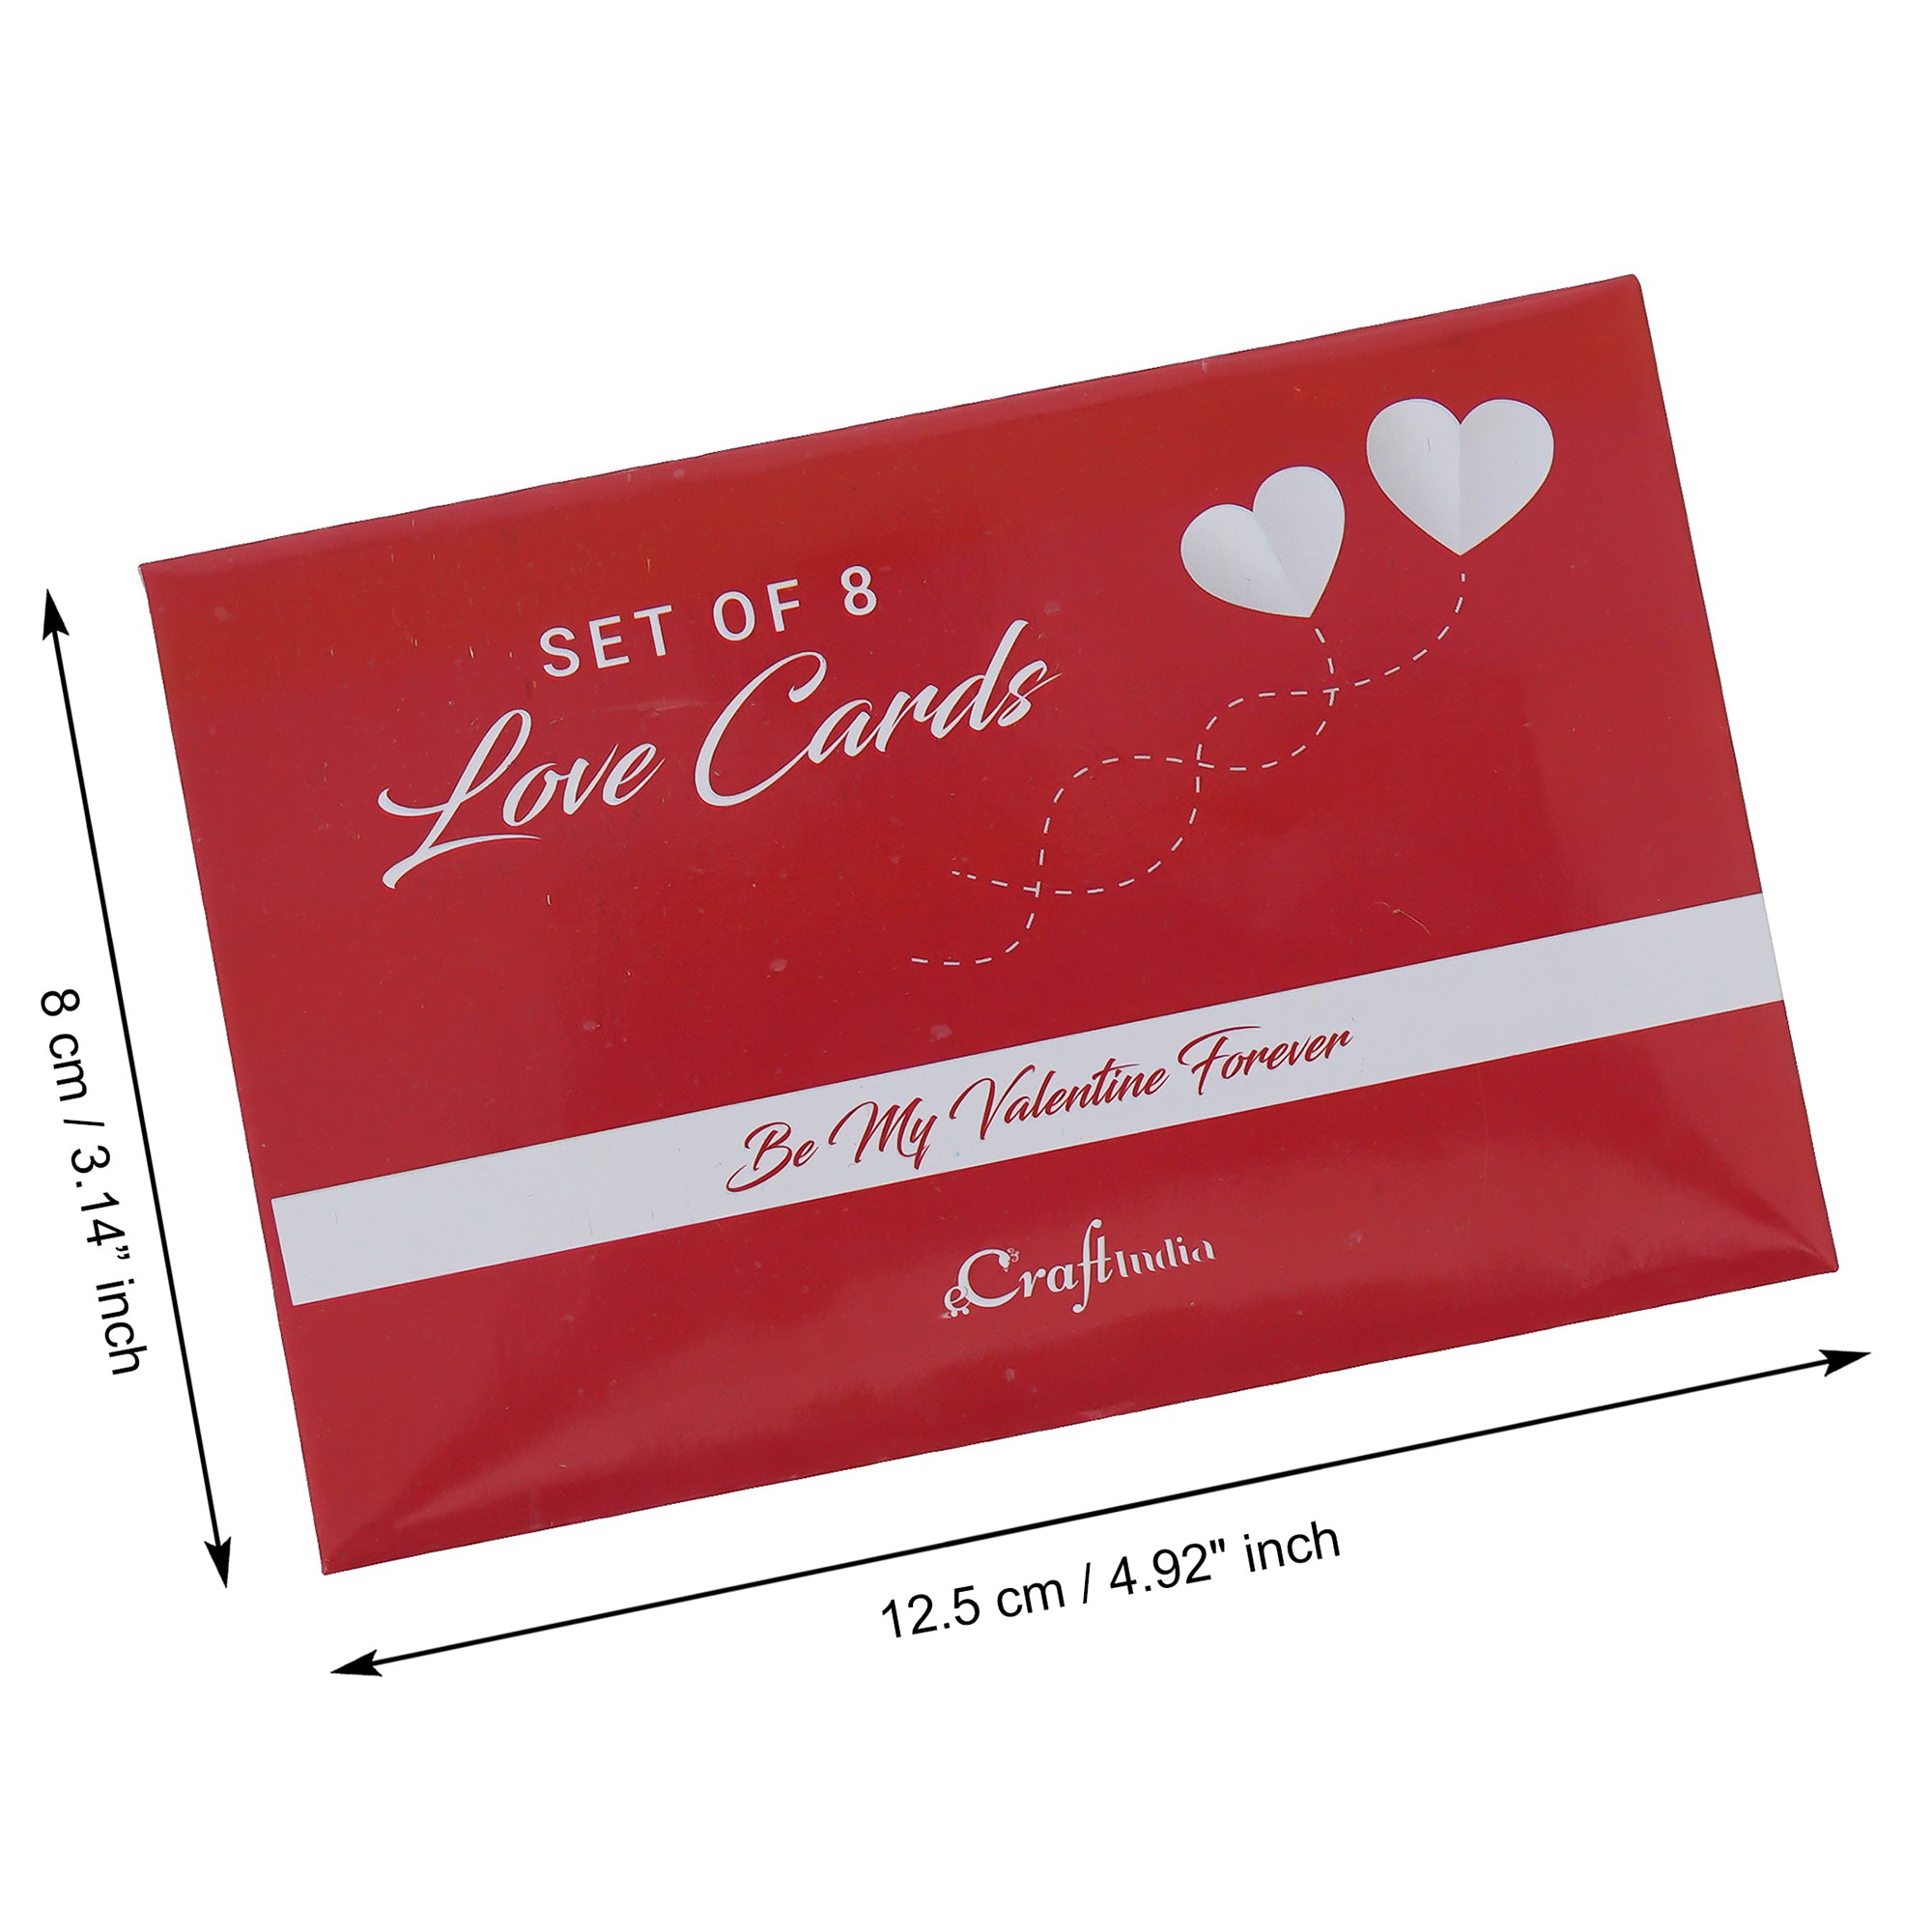 Valentine Combo of Set of 8 Love Post Cards Gift Cards Set, "20 Reasons Why I Love You" Printed on Little Red Hearts Decorative Wooden Gift Set Box, Red Roses Bouquet and White, Red Teddy Bear Valentine's Rectangle Shaped Gift Box 2